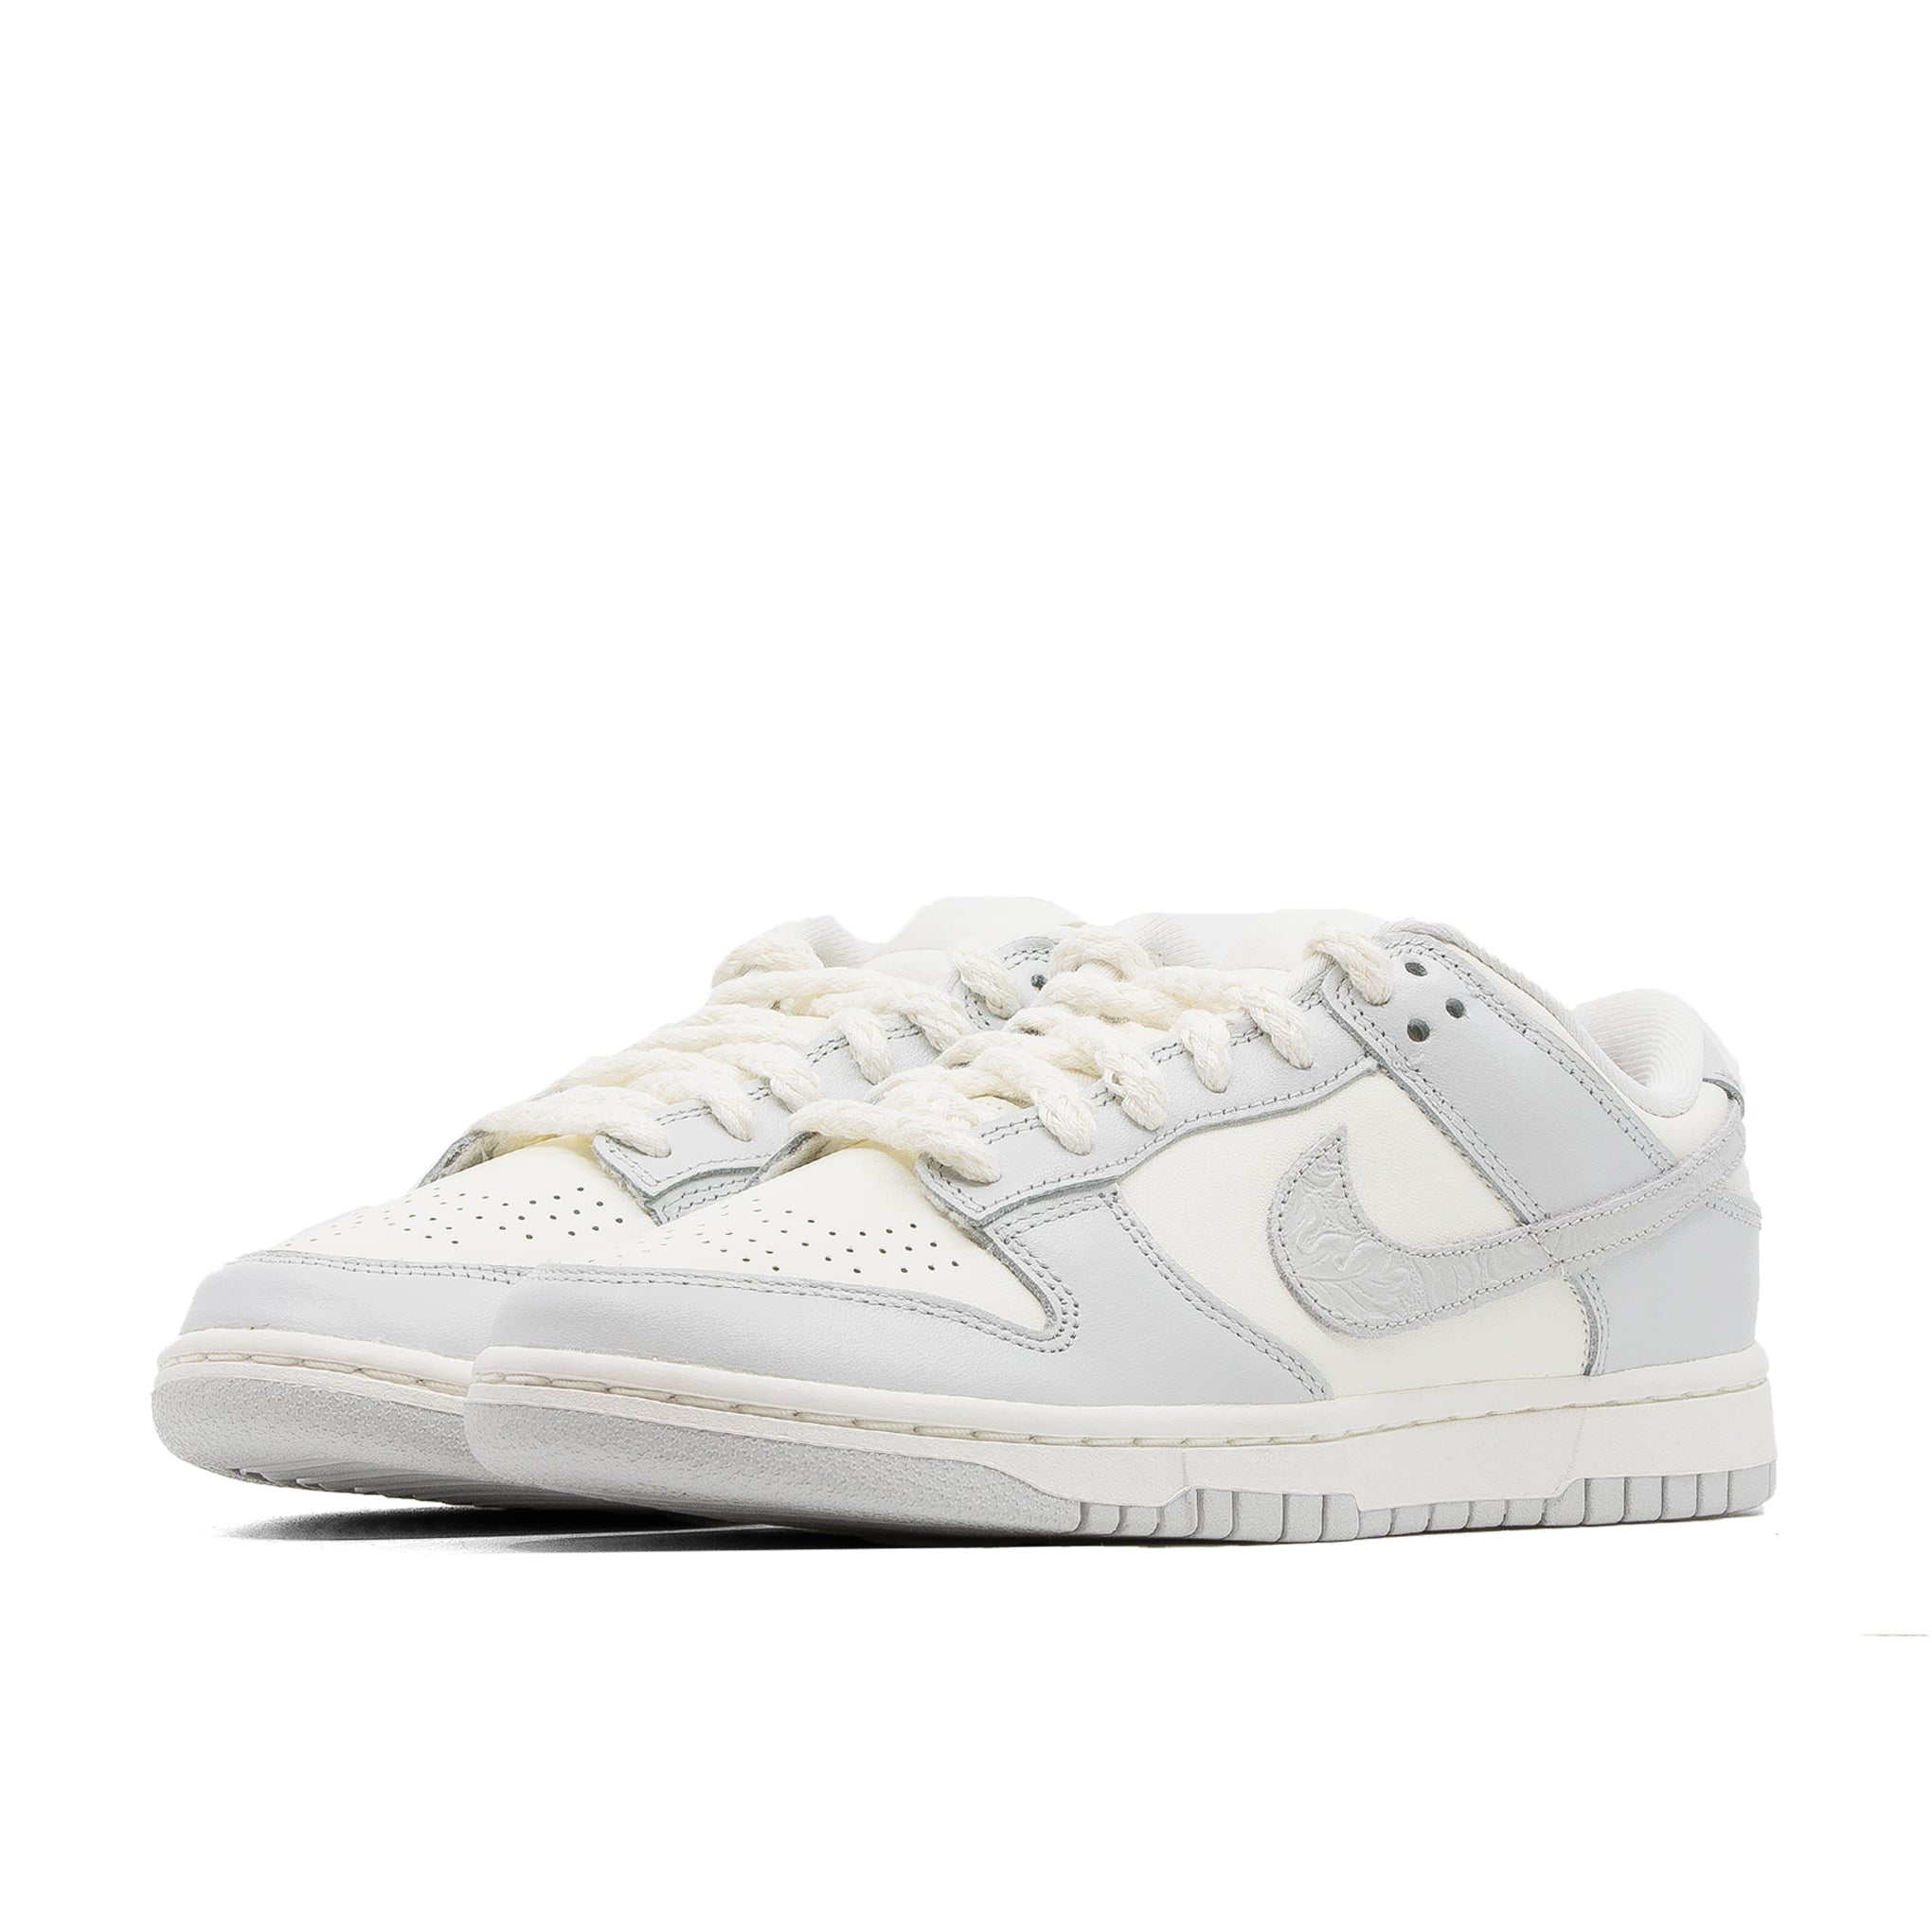 NIKE DUNK LOW WMNS 刺绣